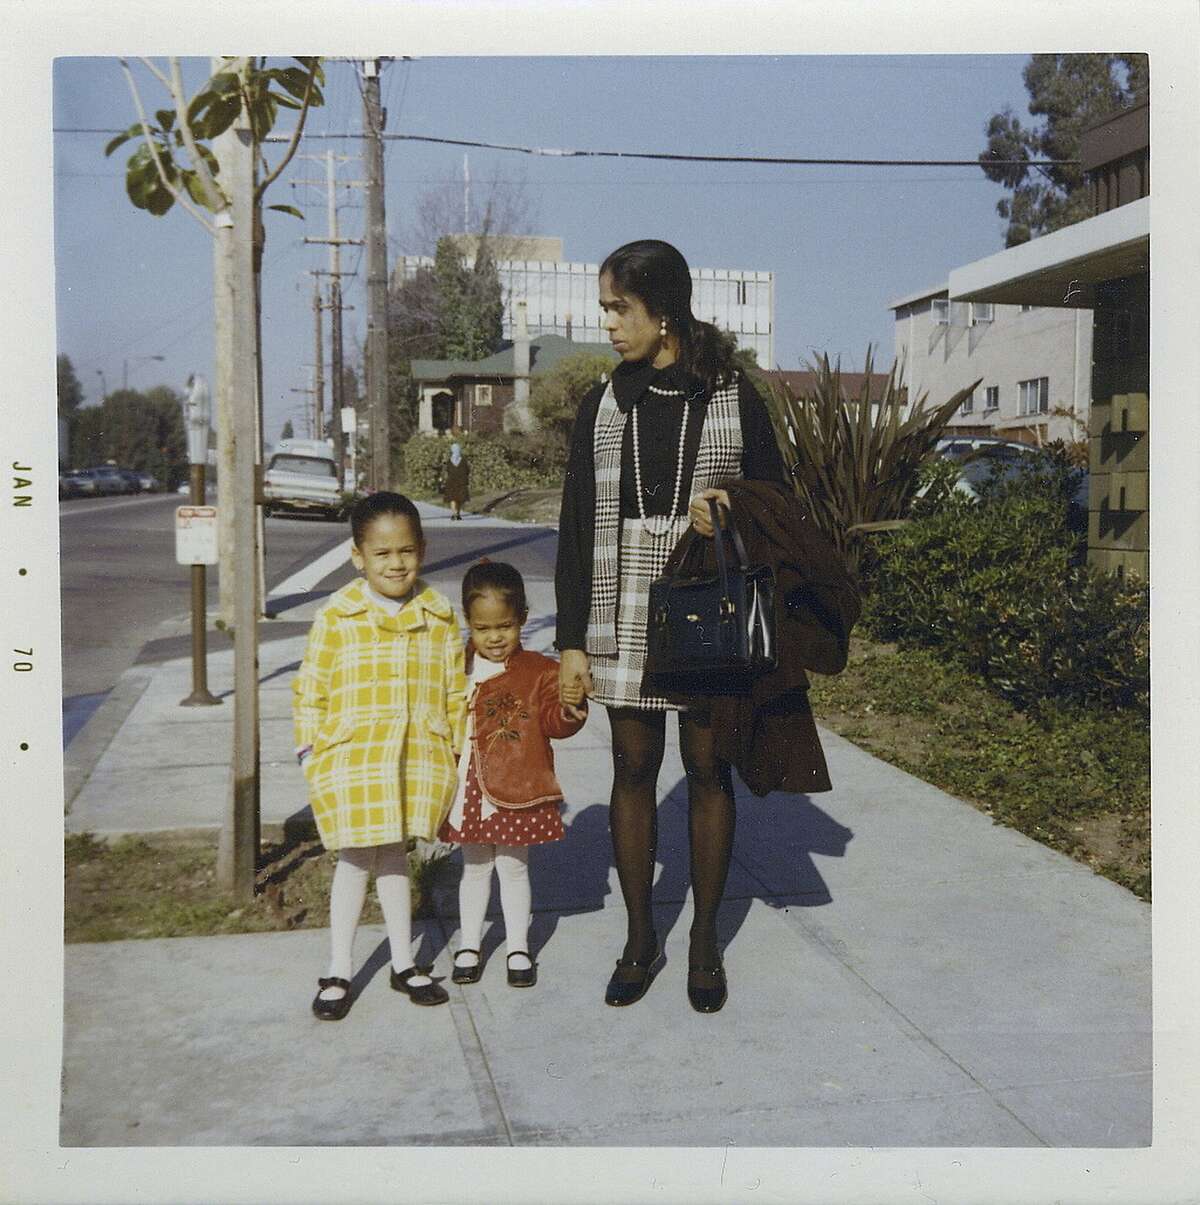 FILE - This January 1970 photo provided by the Kamala Harris campaign shows her, left, with her sister, Maya, and mother, Shyamala, outside their apartment in Berkeley, Calif. On Friday, June 28, 2019, The Associated Press reported on stories circulating online incorrectly asserting that Harris lied during the Thursday, June 27, 2019 Democratic debate when she said she was part of �the second class to integrate� Berkeley Public Schools, with users sharing Berkeley High School yearbook photos showing black and white students attending the school in the 1960s. Harris, however, wasn�t talking about Berkeley High School. She didn�t enter the school system until 1969, at age five. The school didn�t agree to desegregate all 14 elementary schools until the beginning of the 1968 school year. (Kamala Harris campaign via AP)